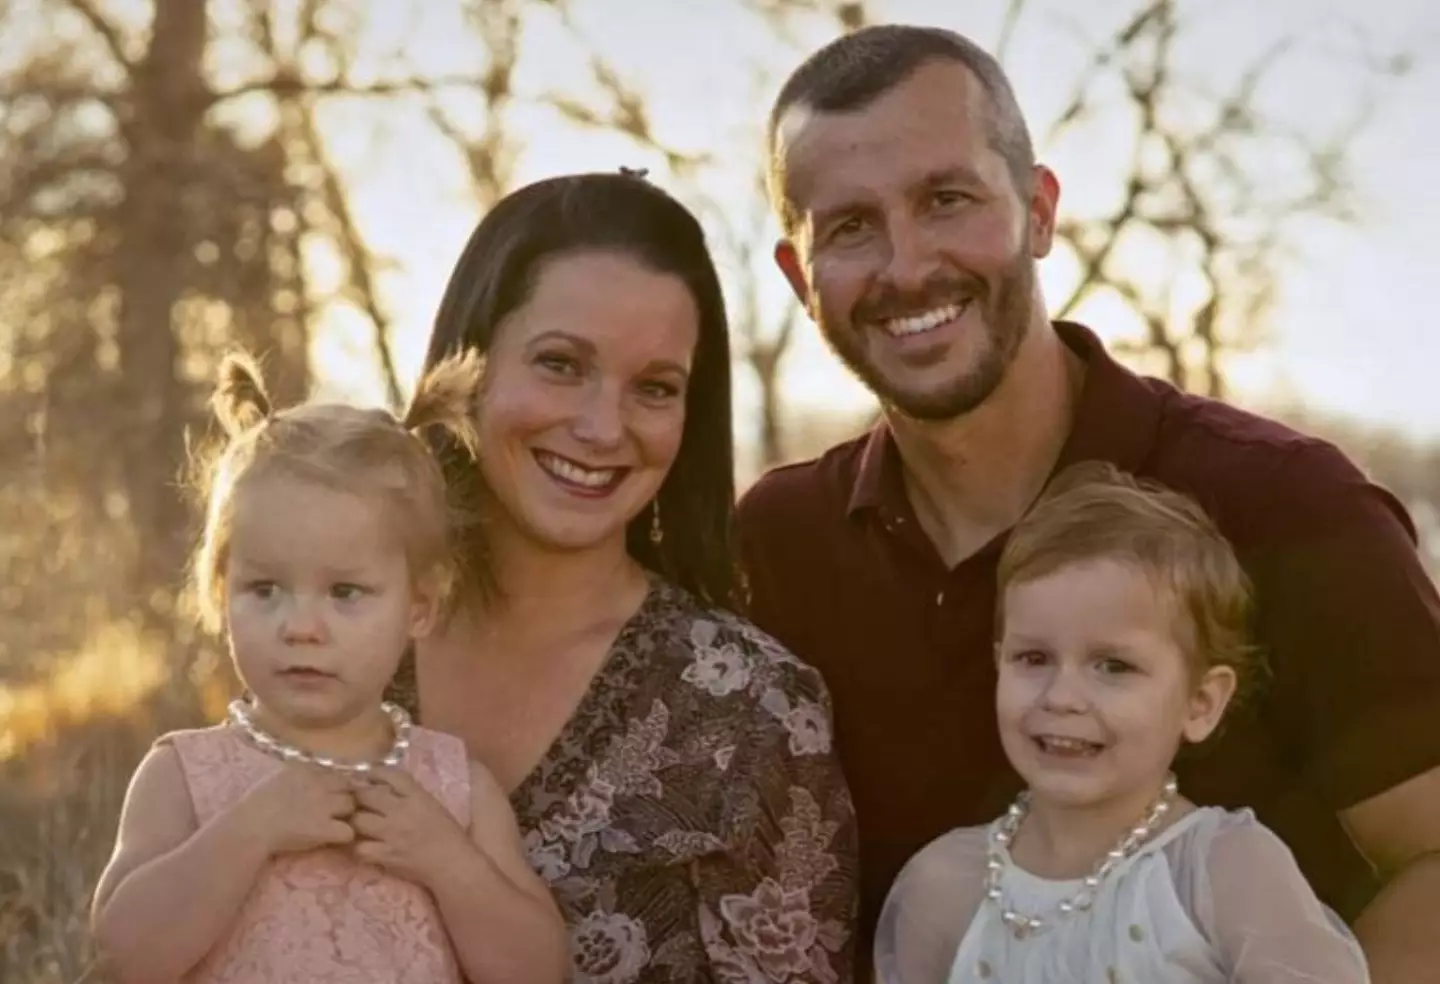 Chris Watts brutally murdered his pregnant wife and their two daughters.